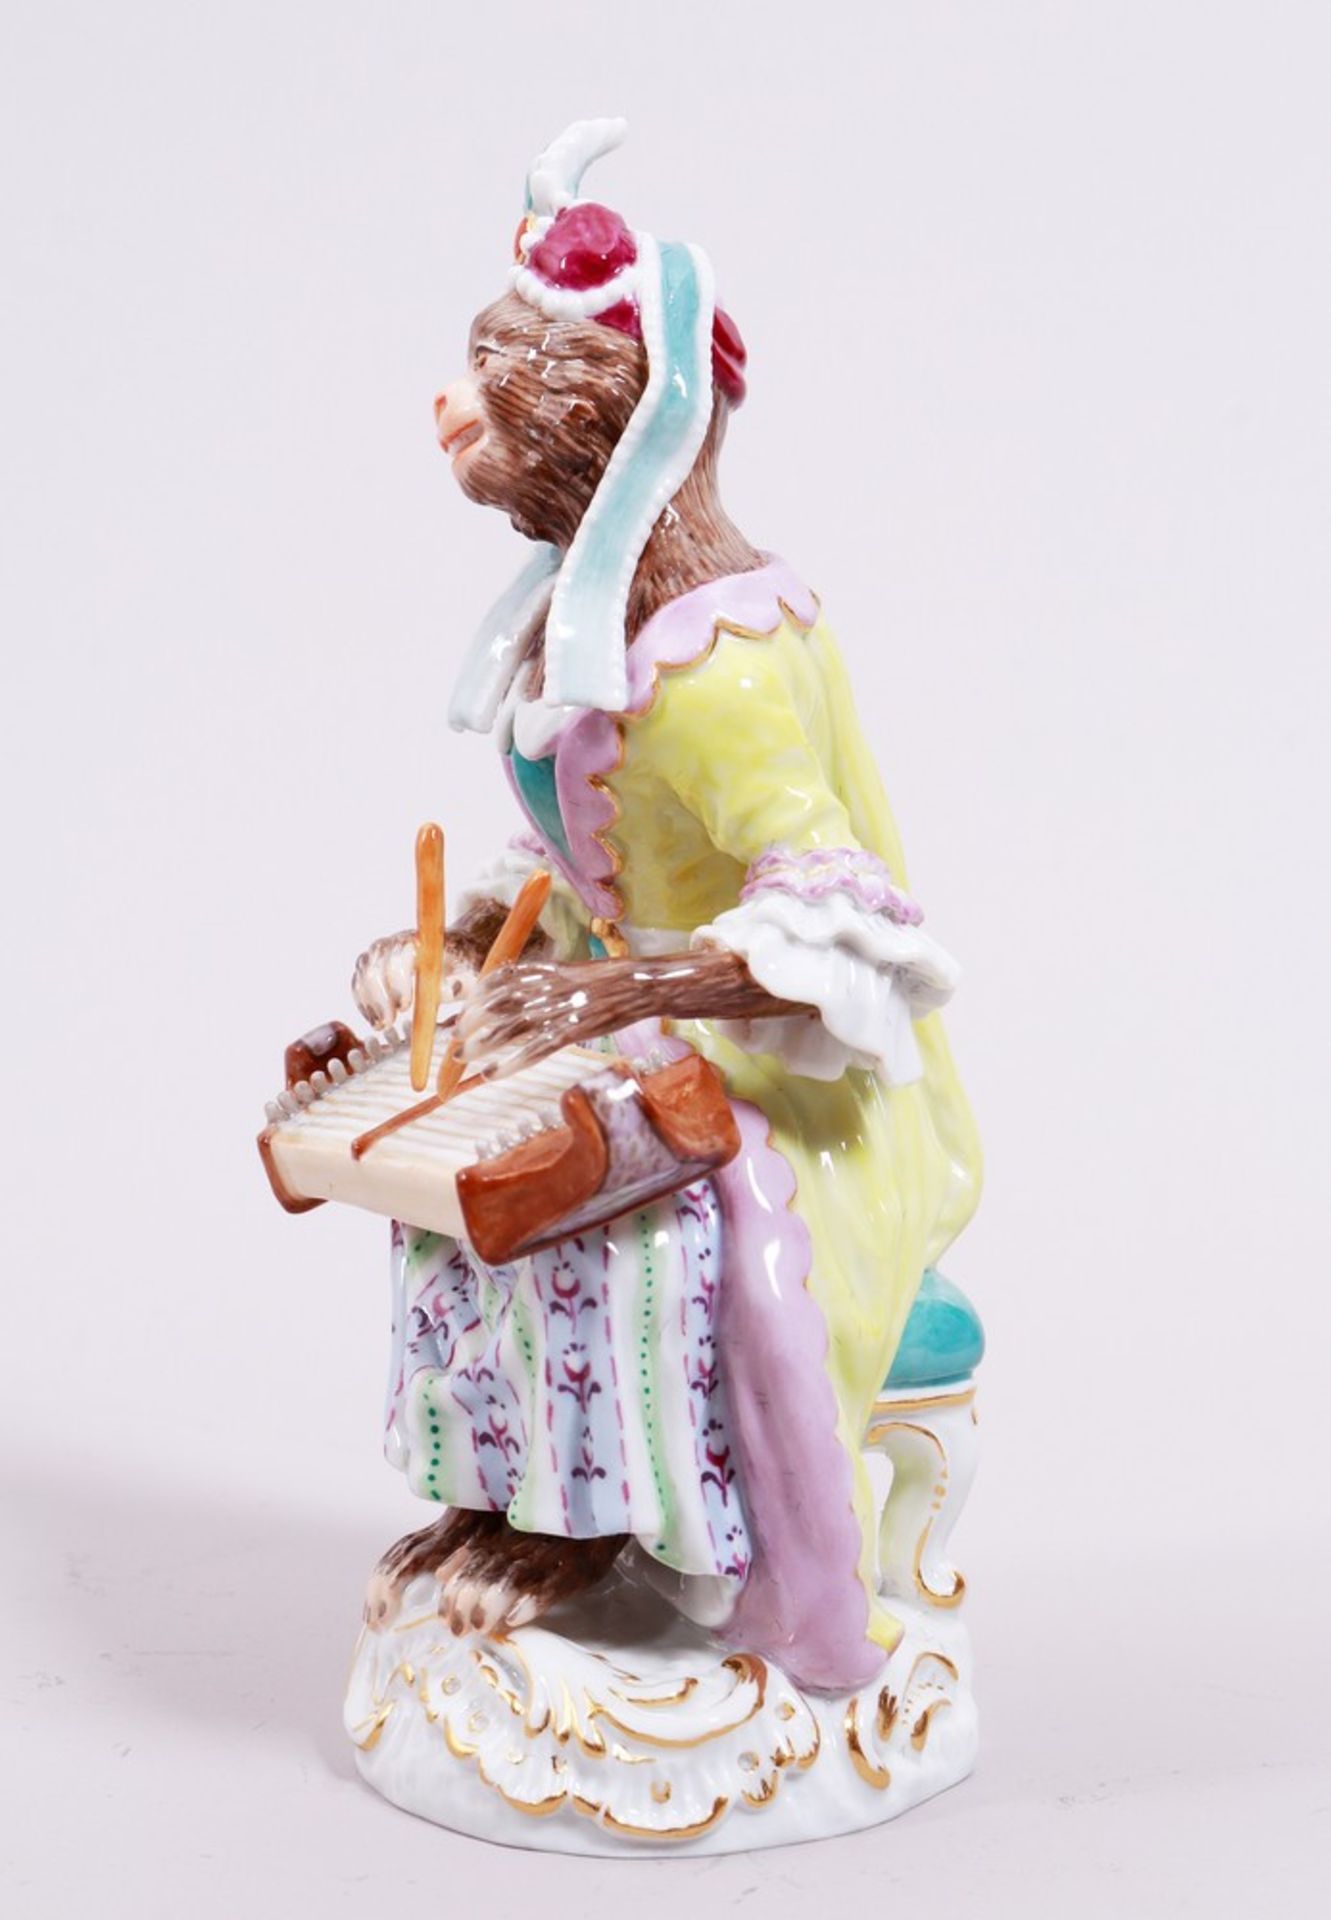 "Monkey with zither" for the "Affenkapelle", design 2019 by Silke Ebermann for Meissen, limited edi - Image 7 of 12